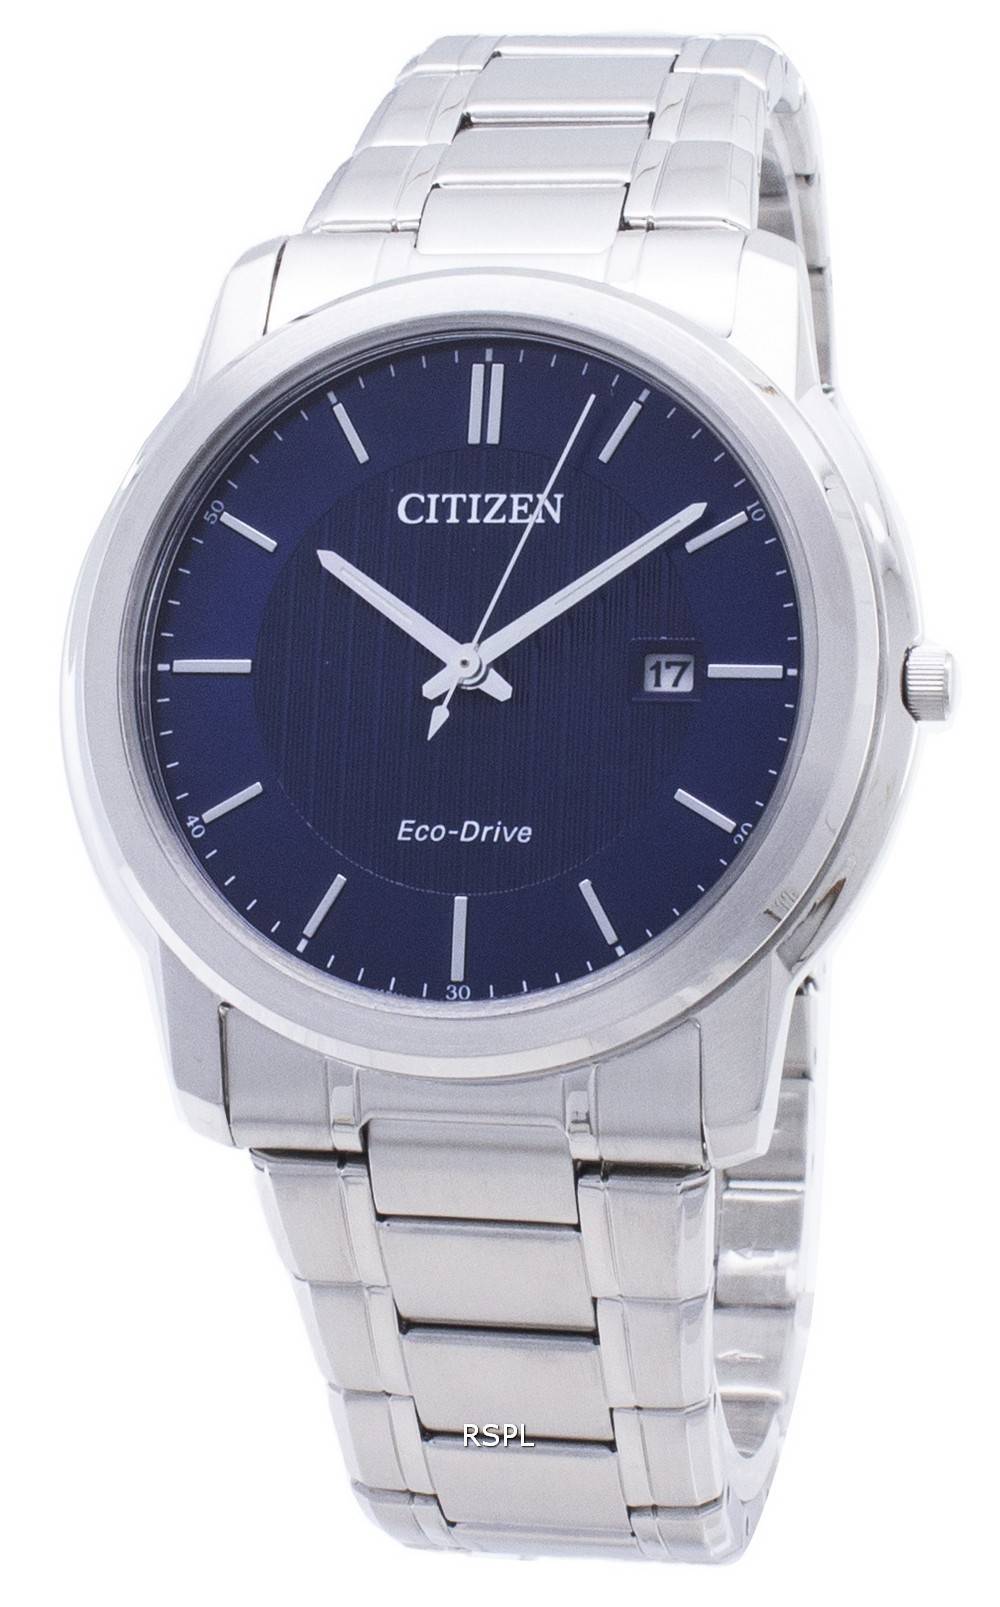 Citizen Eco-Drive AW1211-80L Analog Men's Watch - CityWatches.co.nz